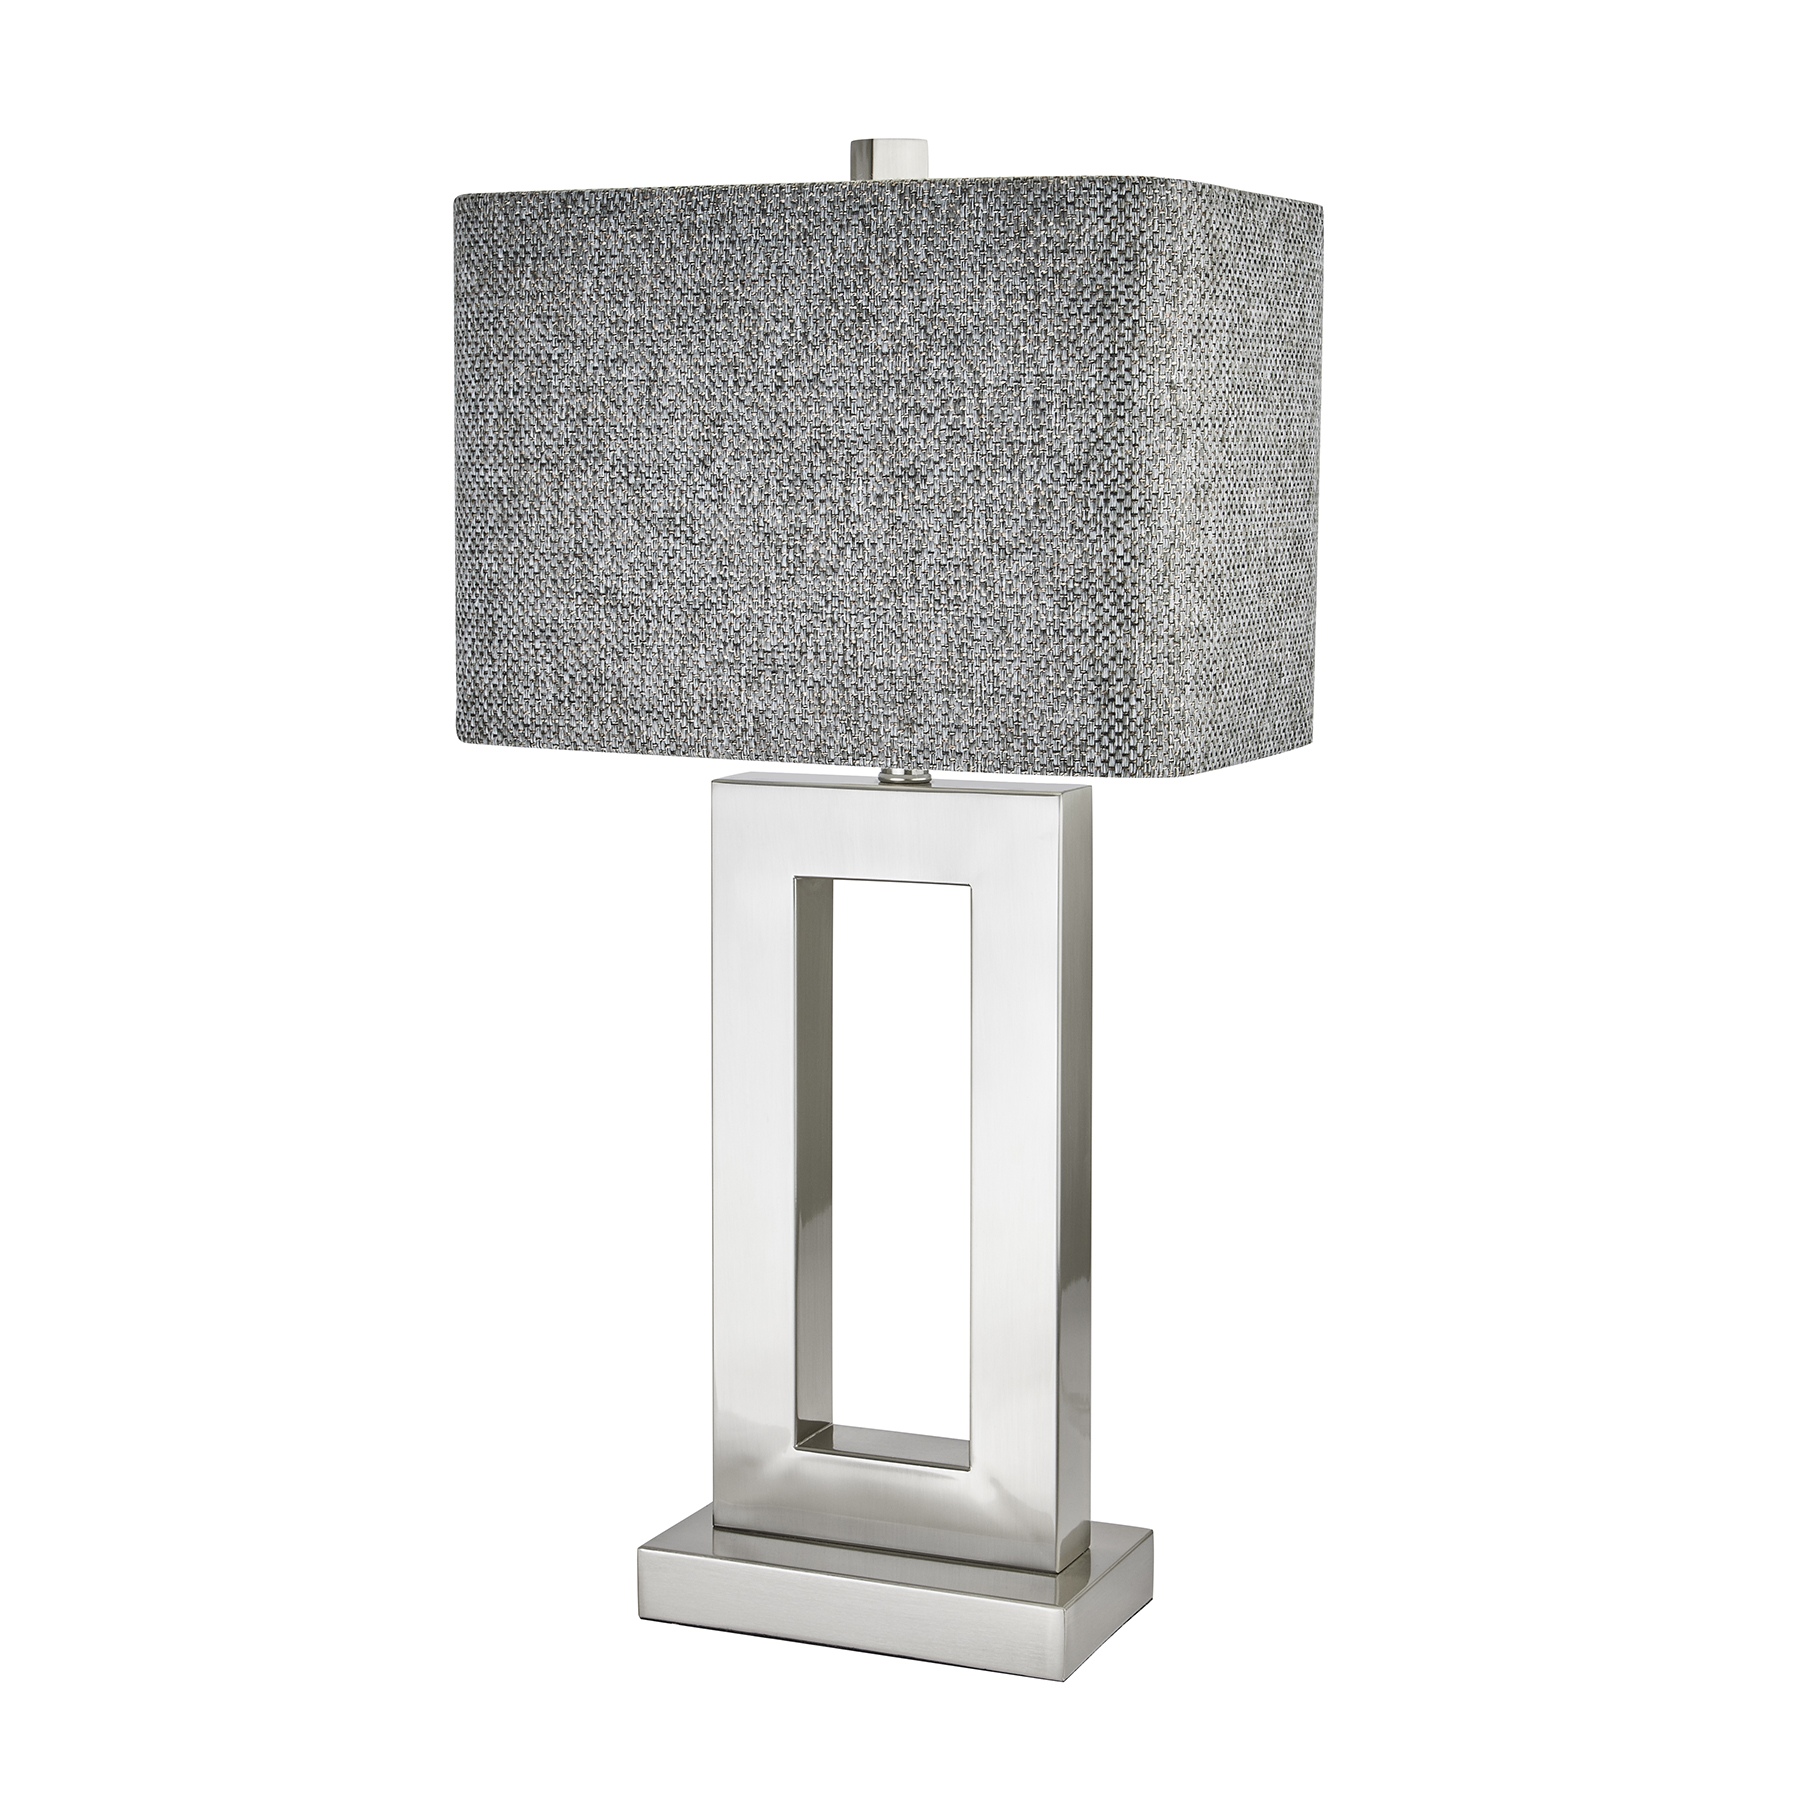 Baleria Chrome Lamp With Woven Shade